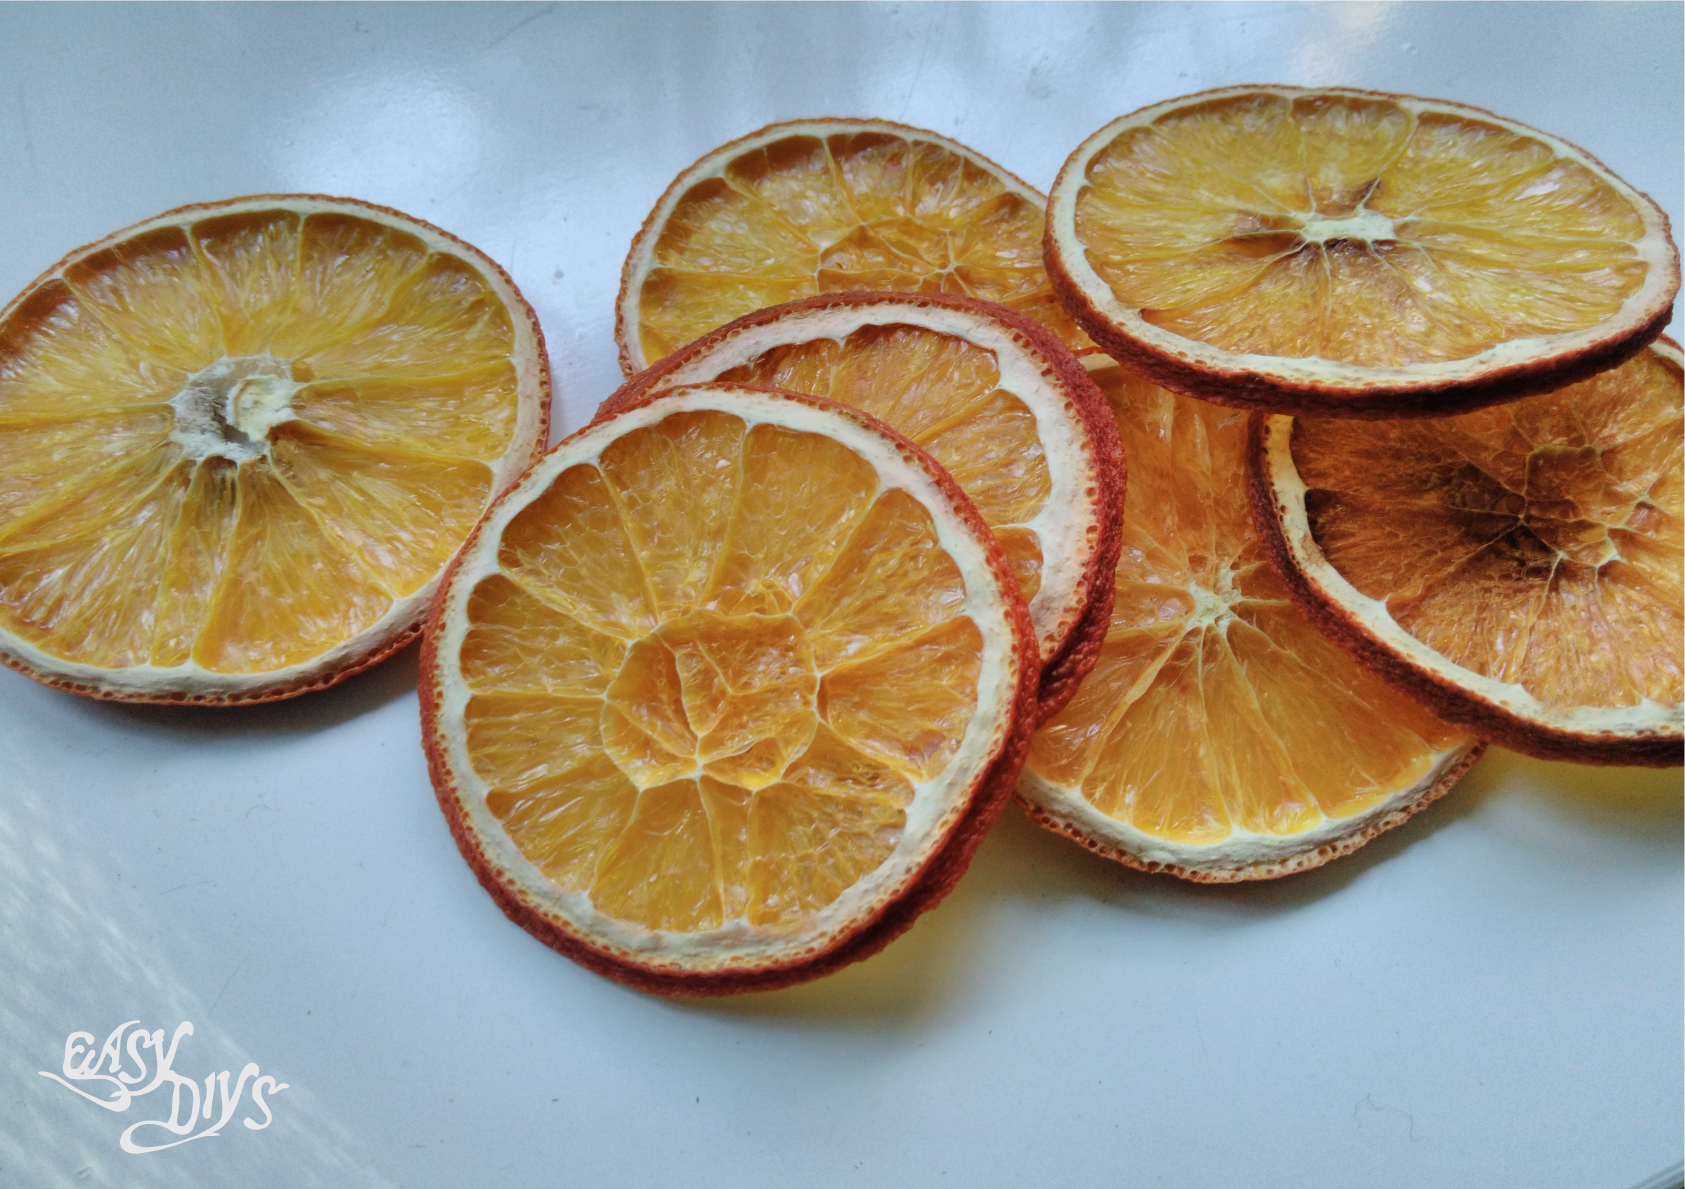 How to Dry Oranges for Crafts